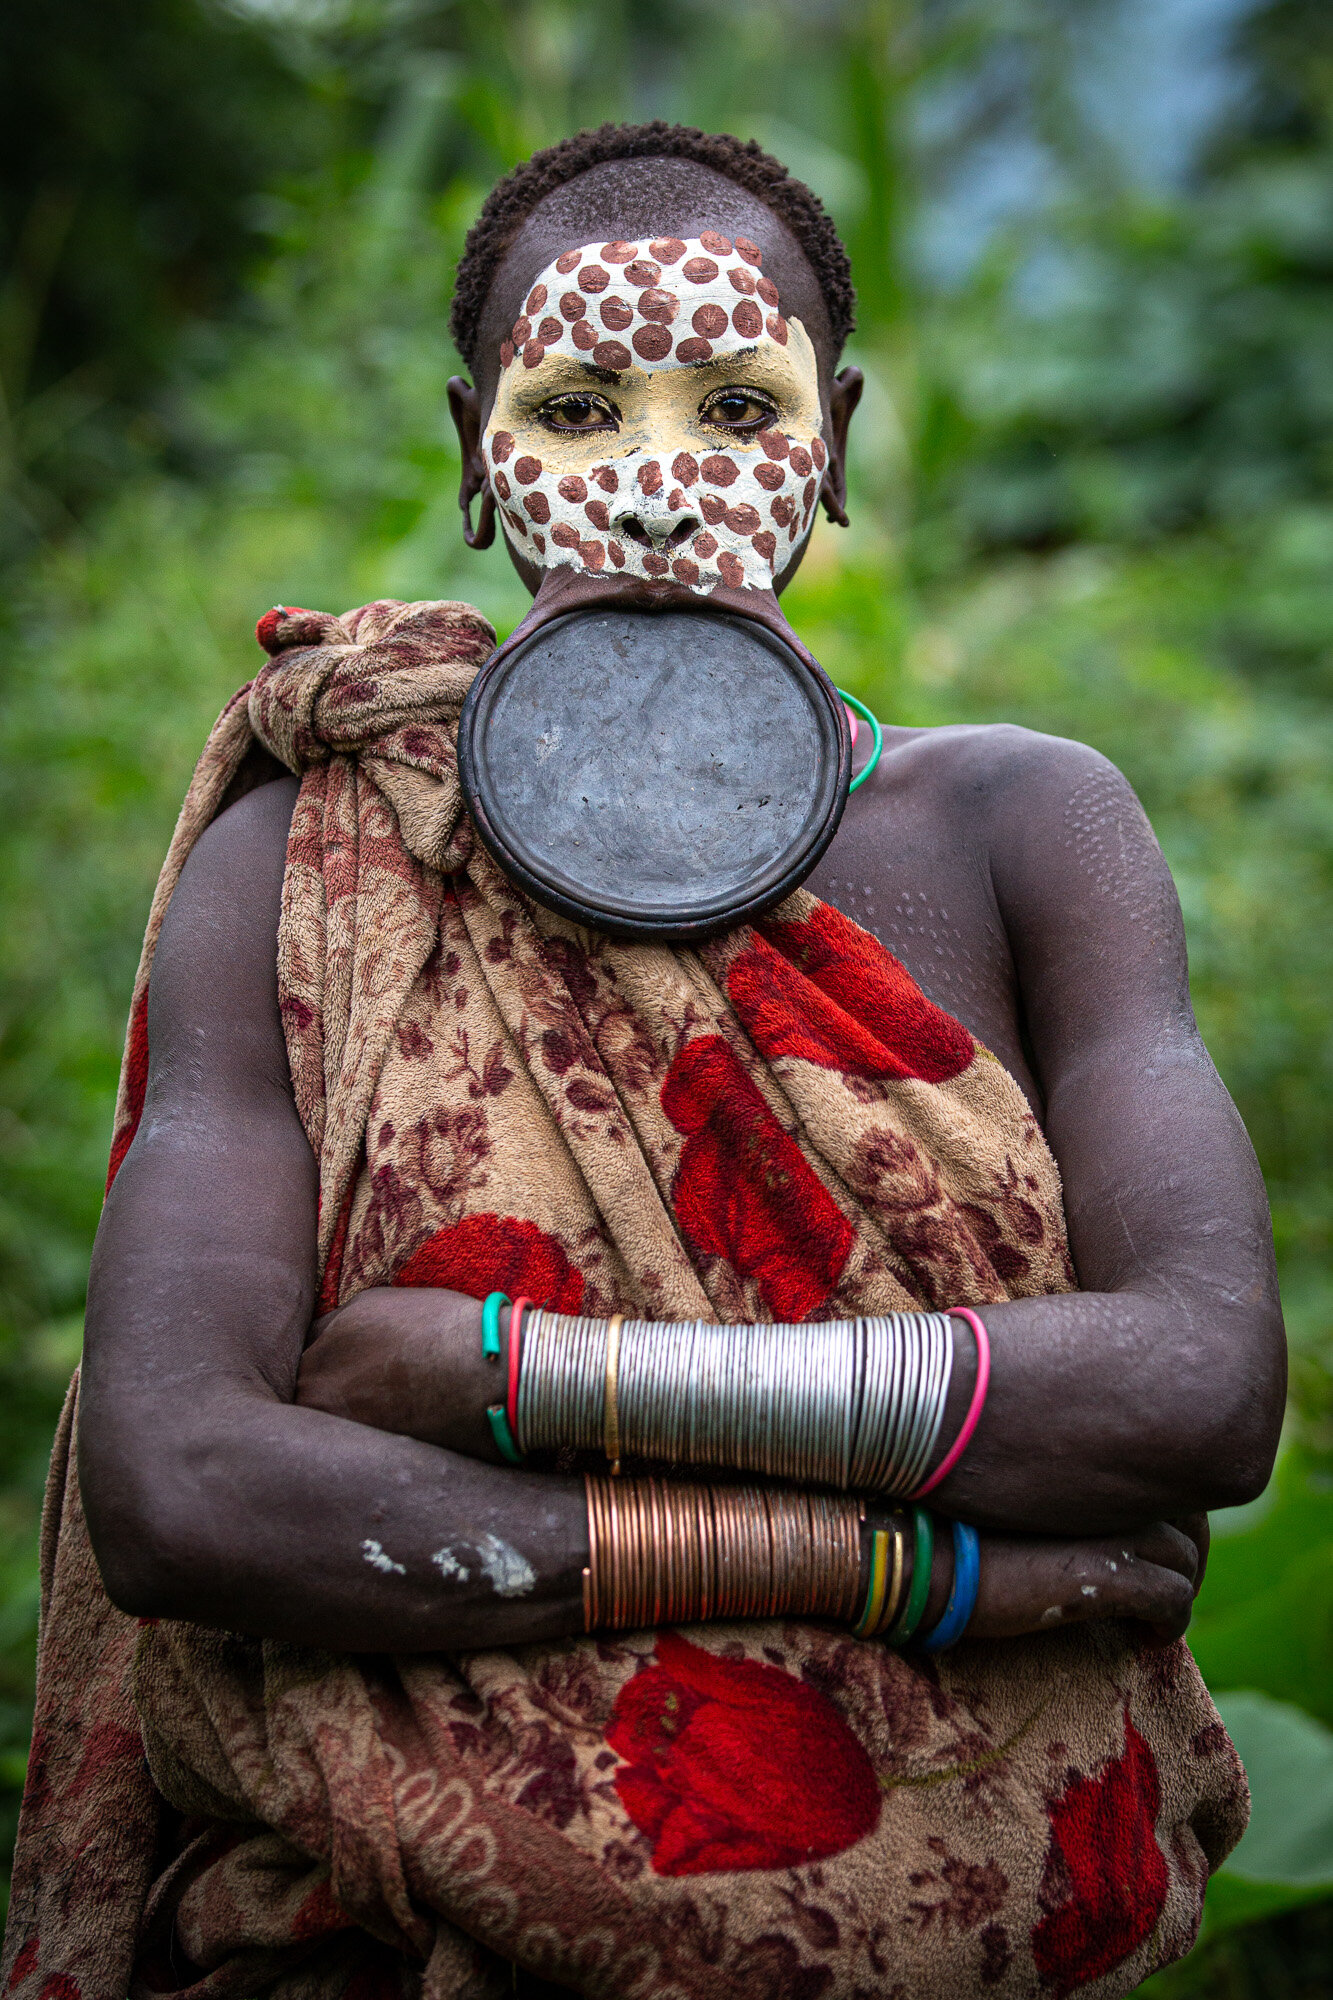 African tribal make-up: What's behind the face paint?